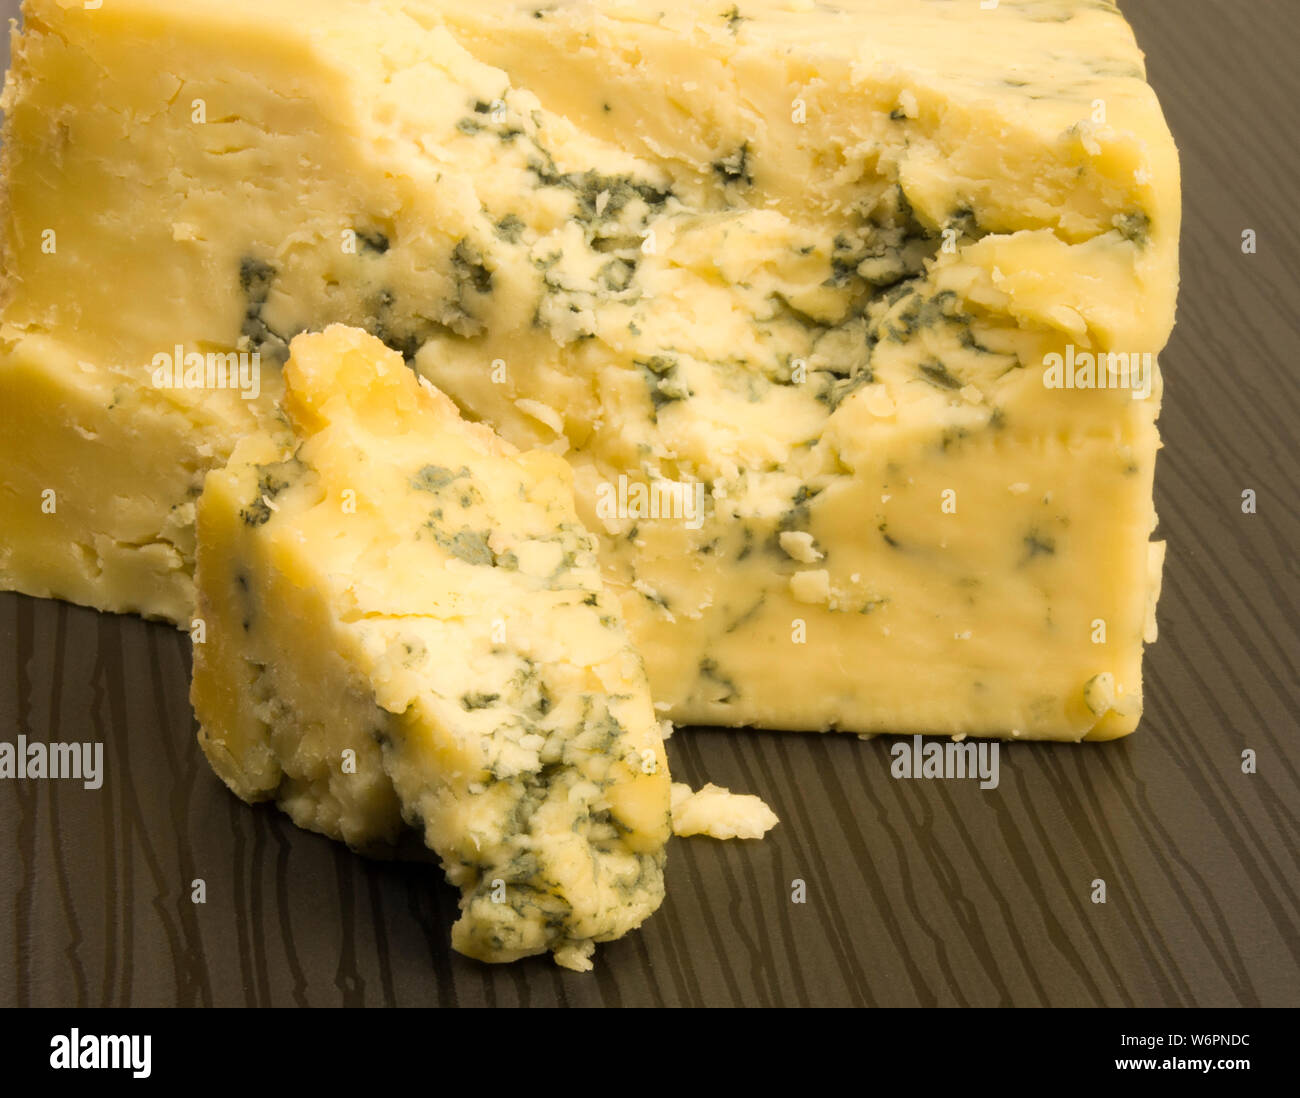 Crumbling blue cheese on a tiled table. Stock Photo